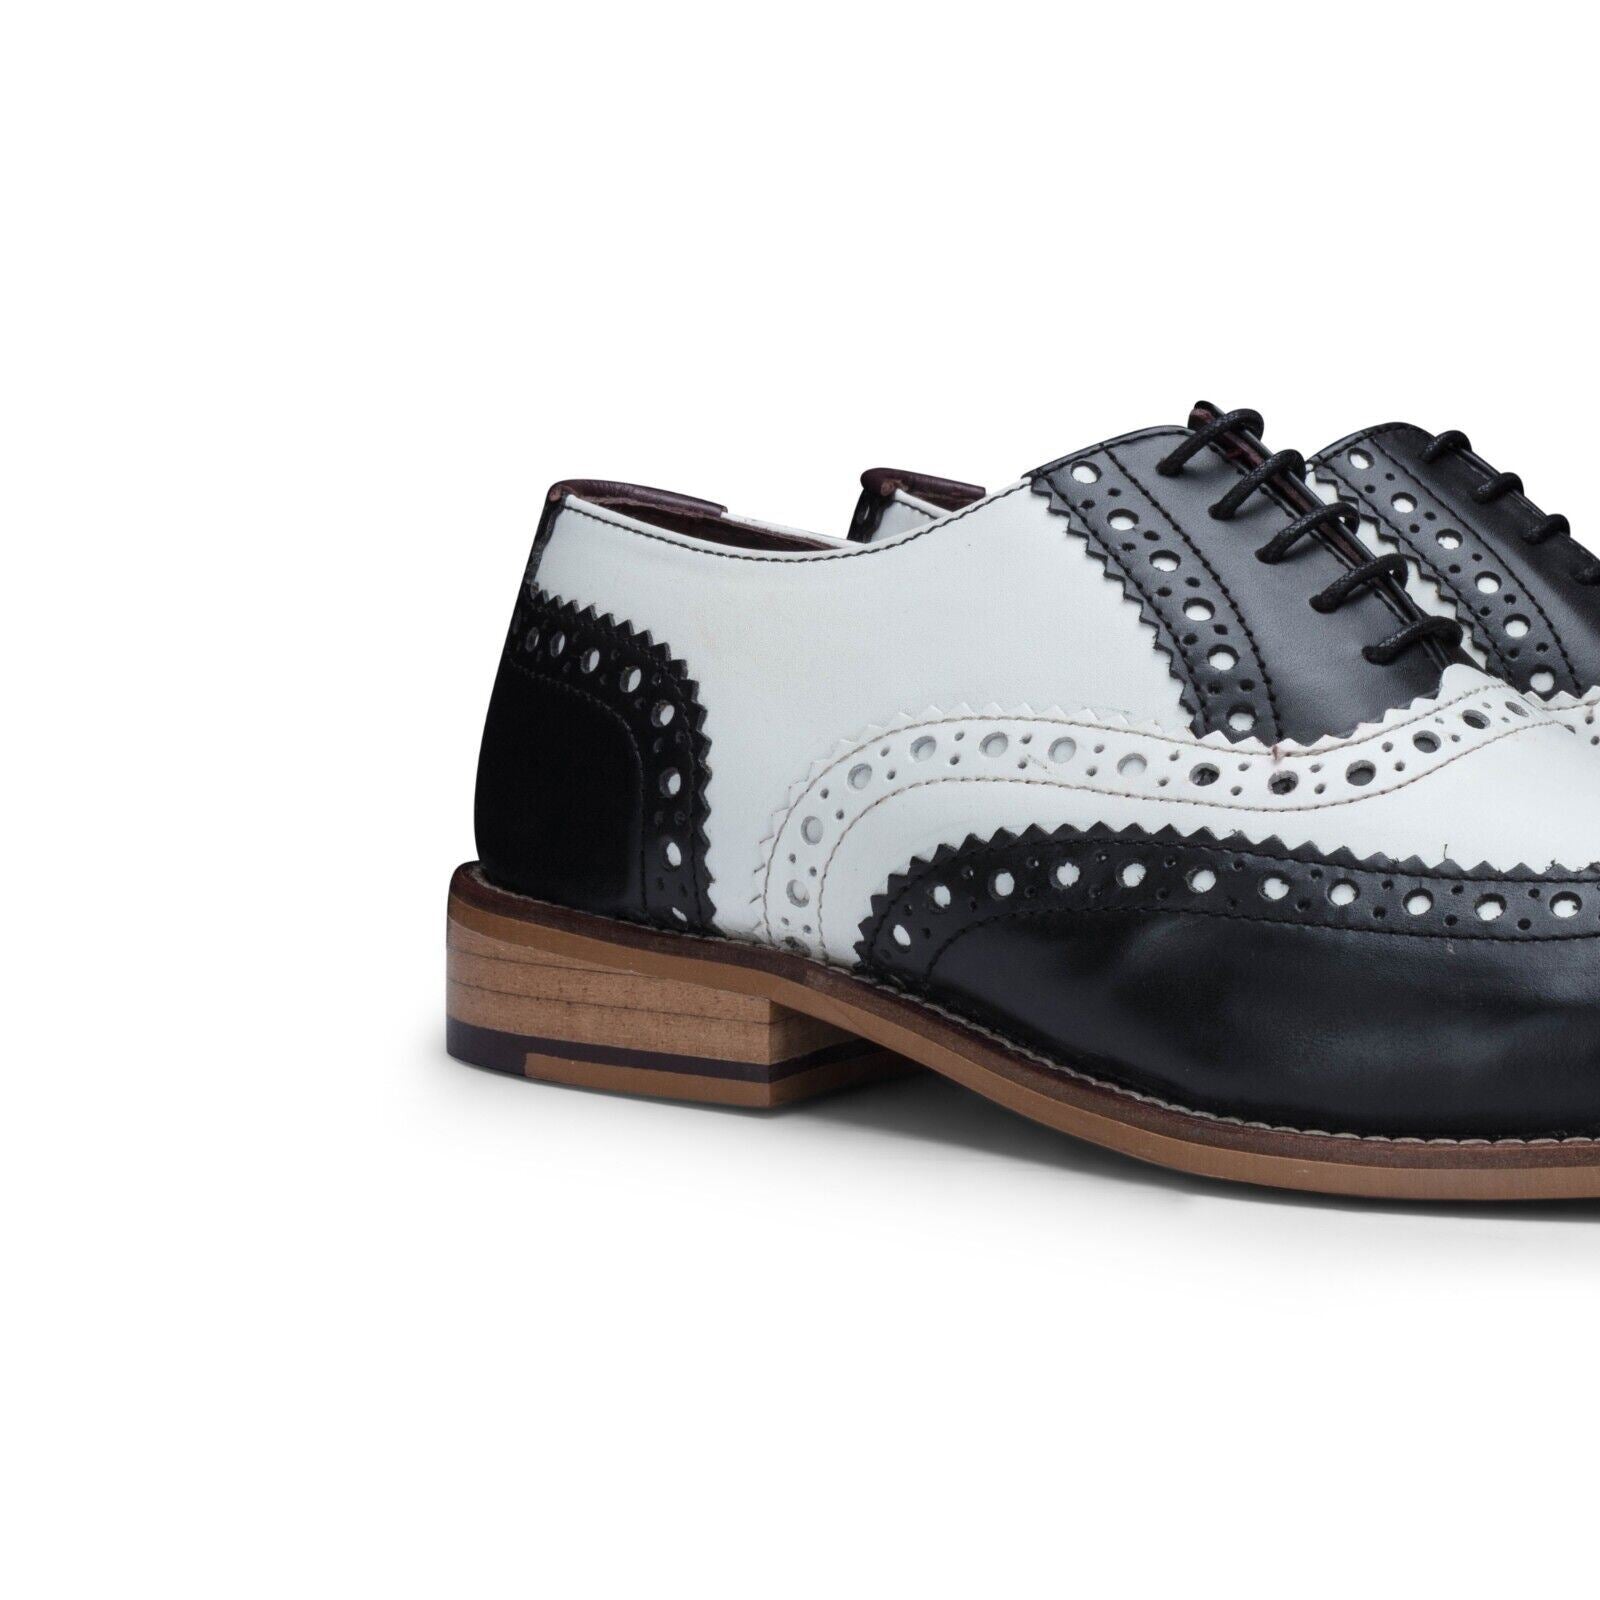 Mens Classic Oxford Black/White Leather Gatsby Brogue Shoes - Upperclass Fashions 